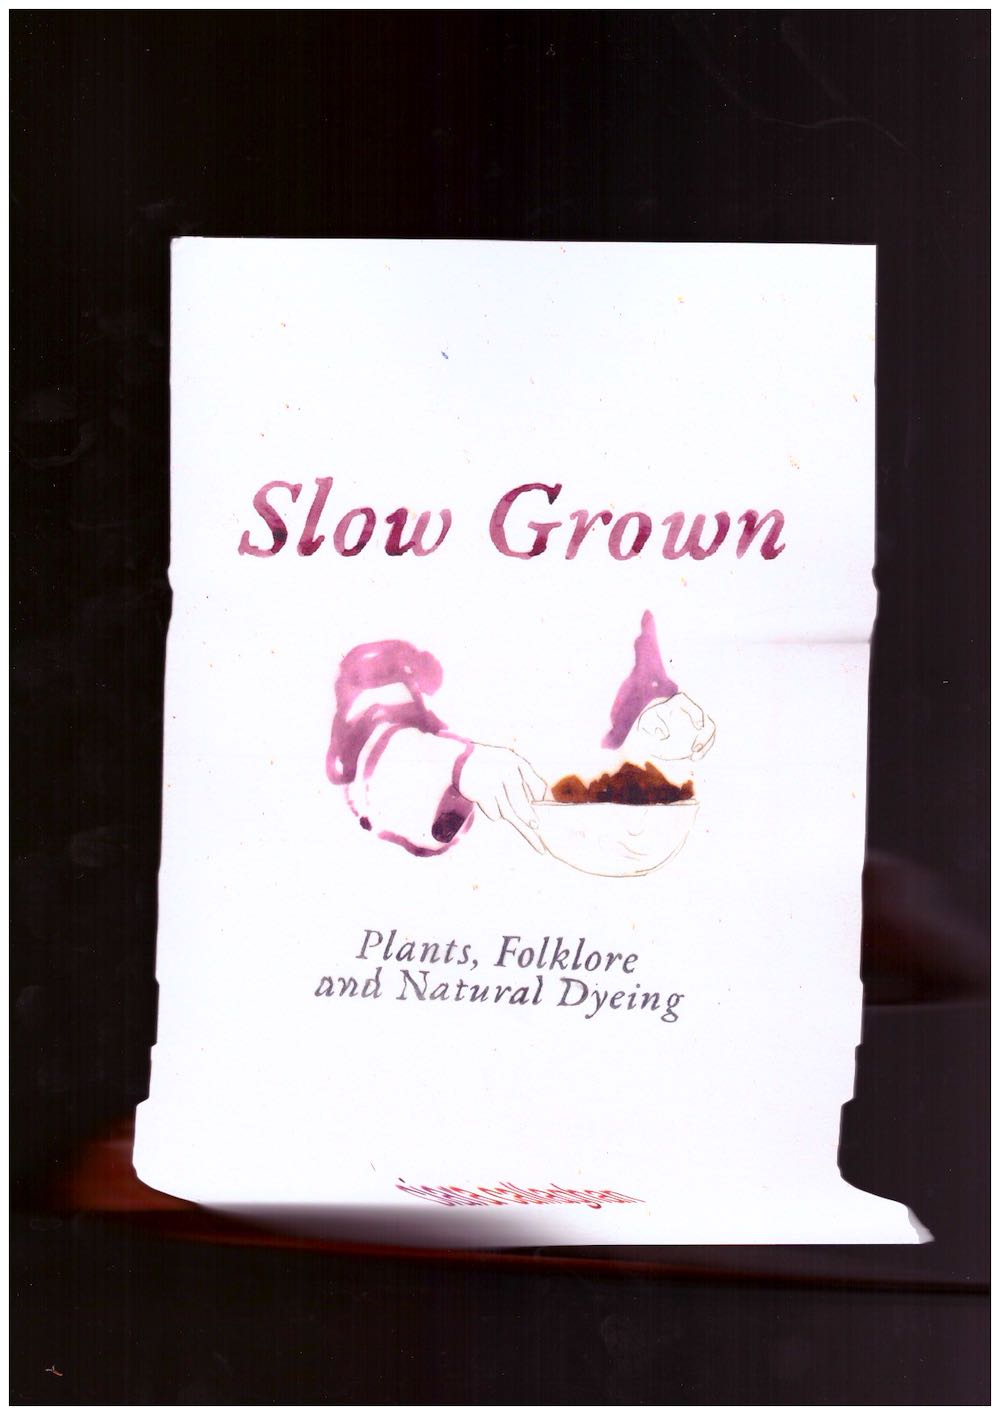 CALLAGHAN, Ciara - Slow Grown: Plants, Folklore and Natural Dyeing